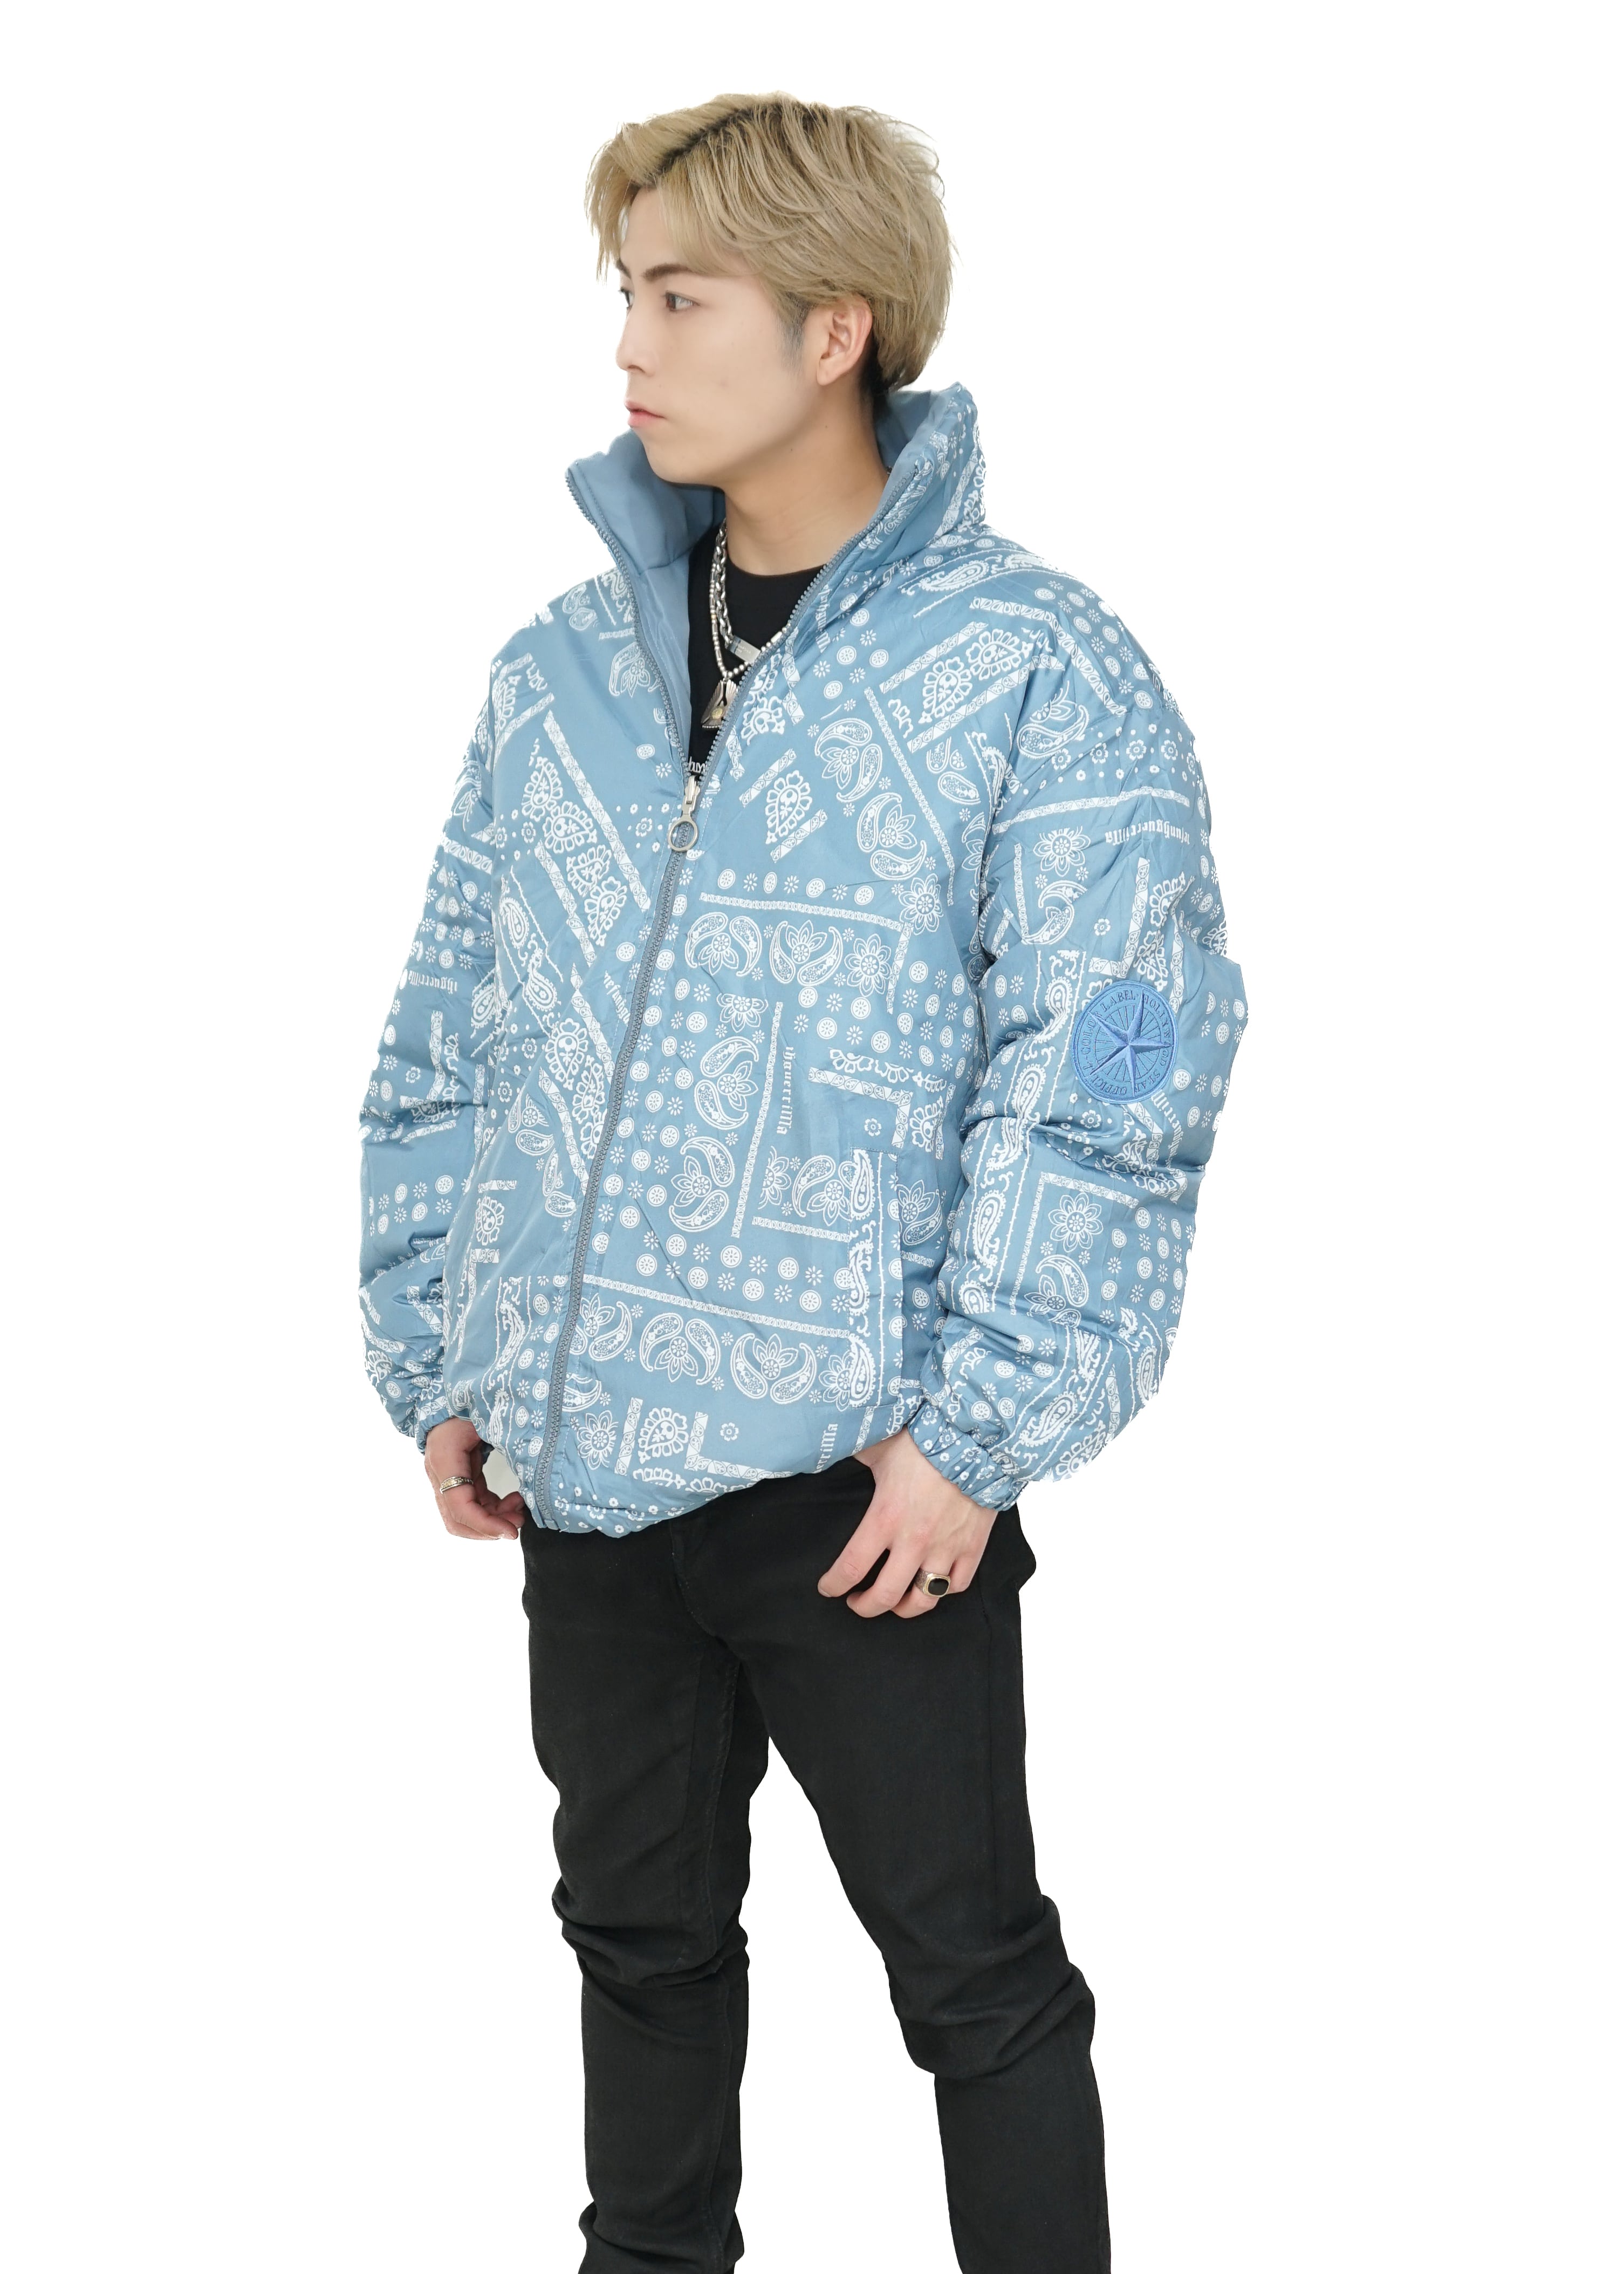 66.COLOR LABEL PUFFY JACKET【BLUE】 | HOLLYWOOD STAR OFFICIAL powered by BASE